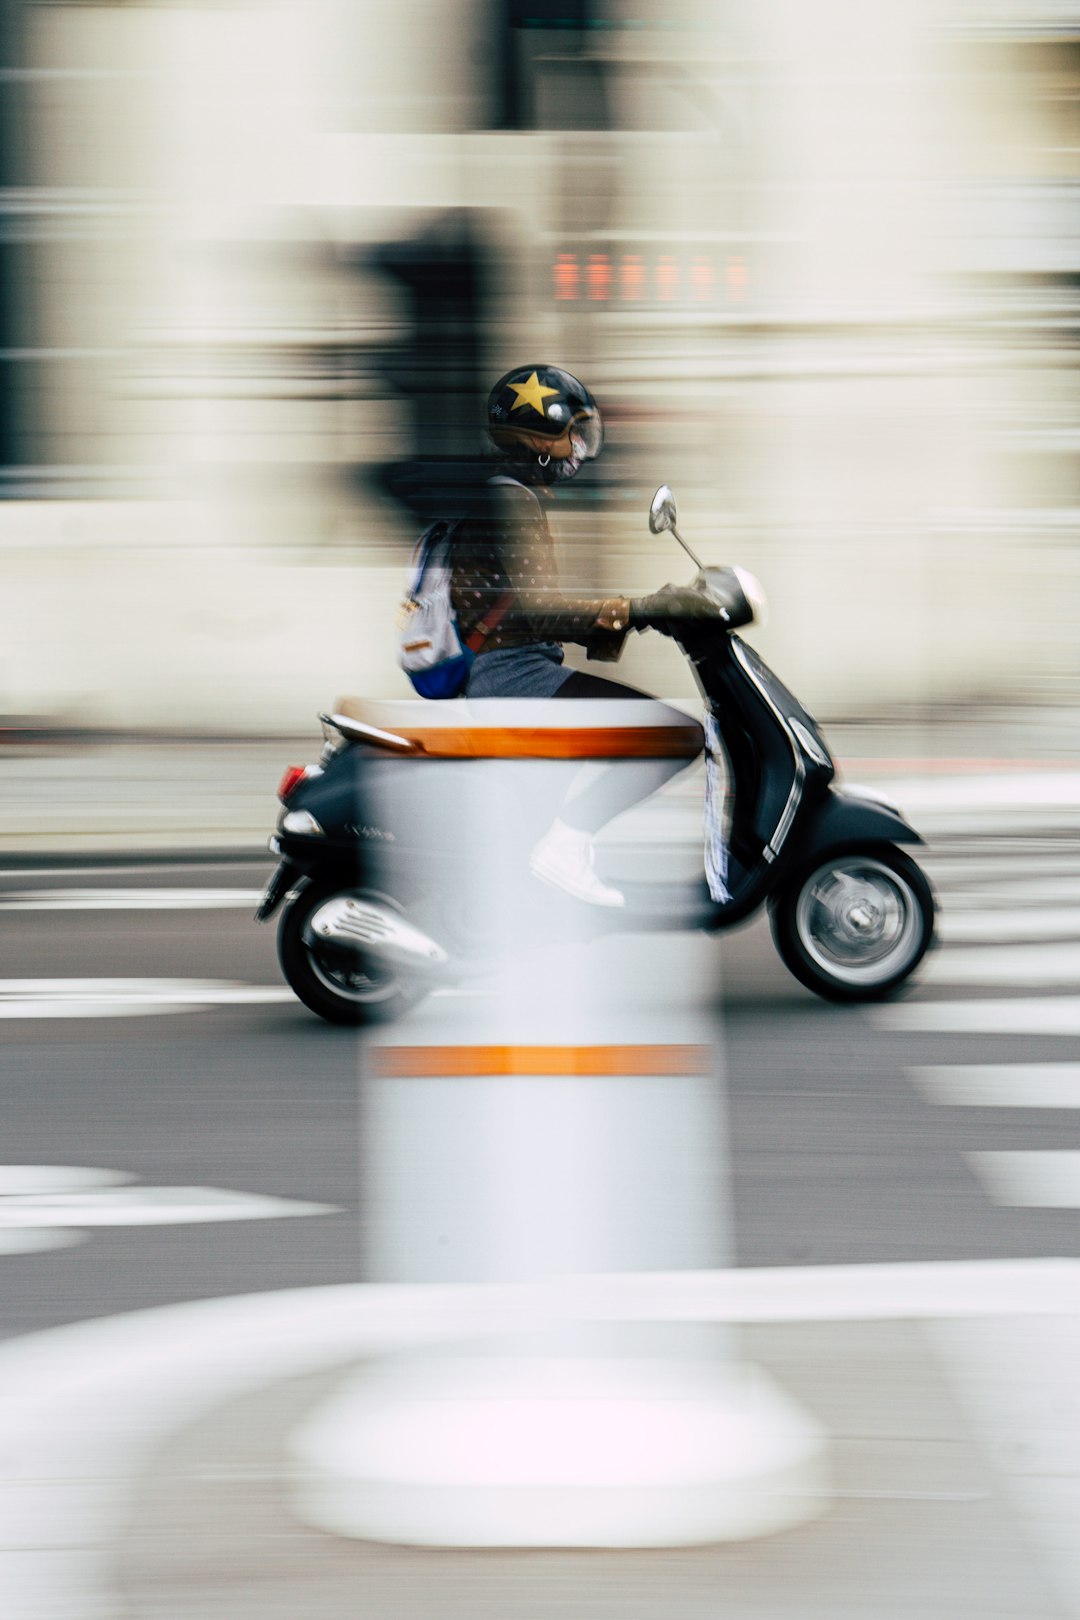 man in blue jacket riding on orange and white motor scooter